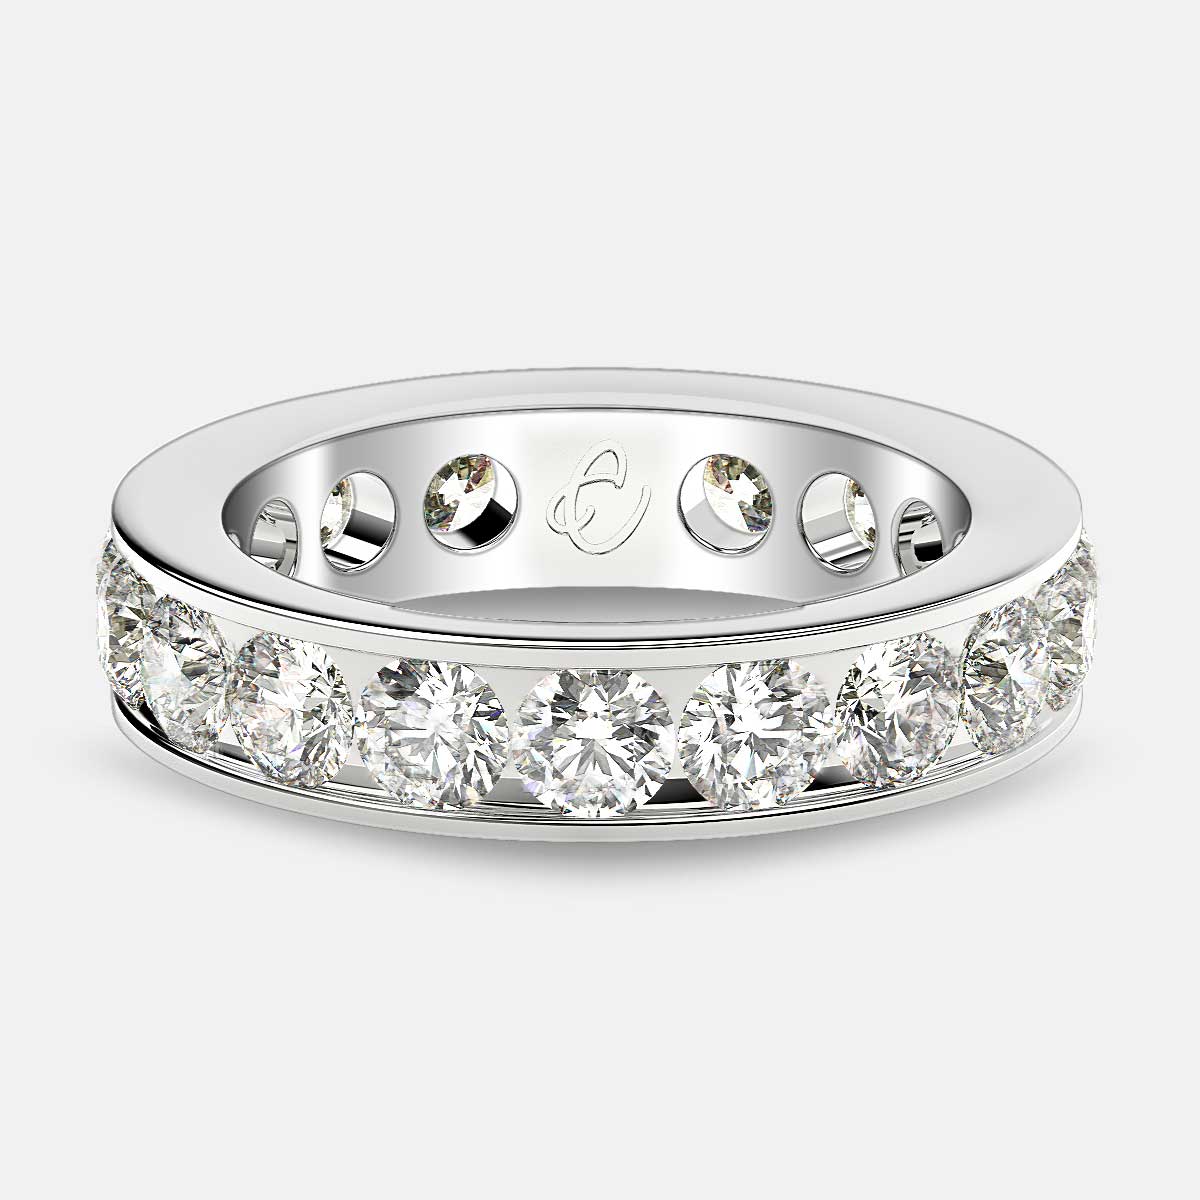 Channel Set Eternity Ring with Round Diamonds in Platinum